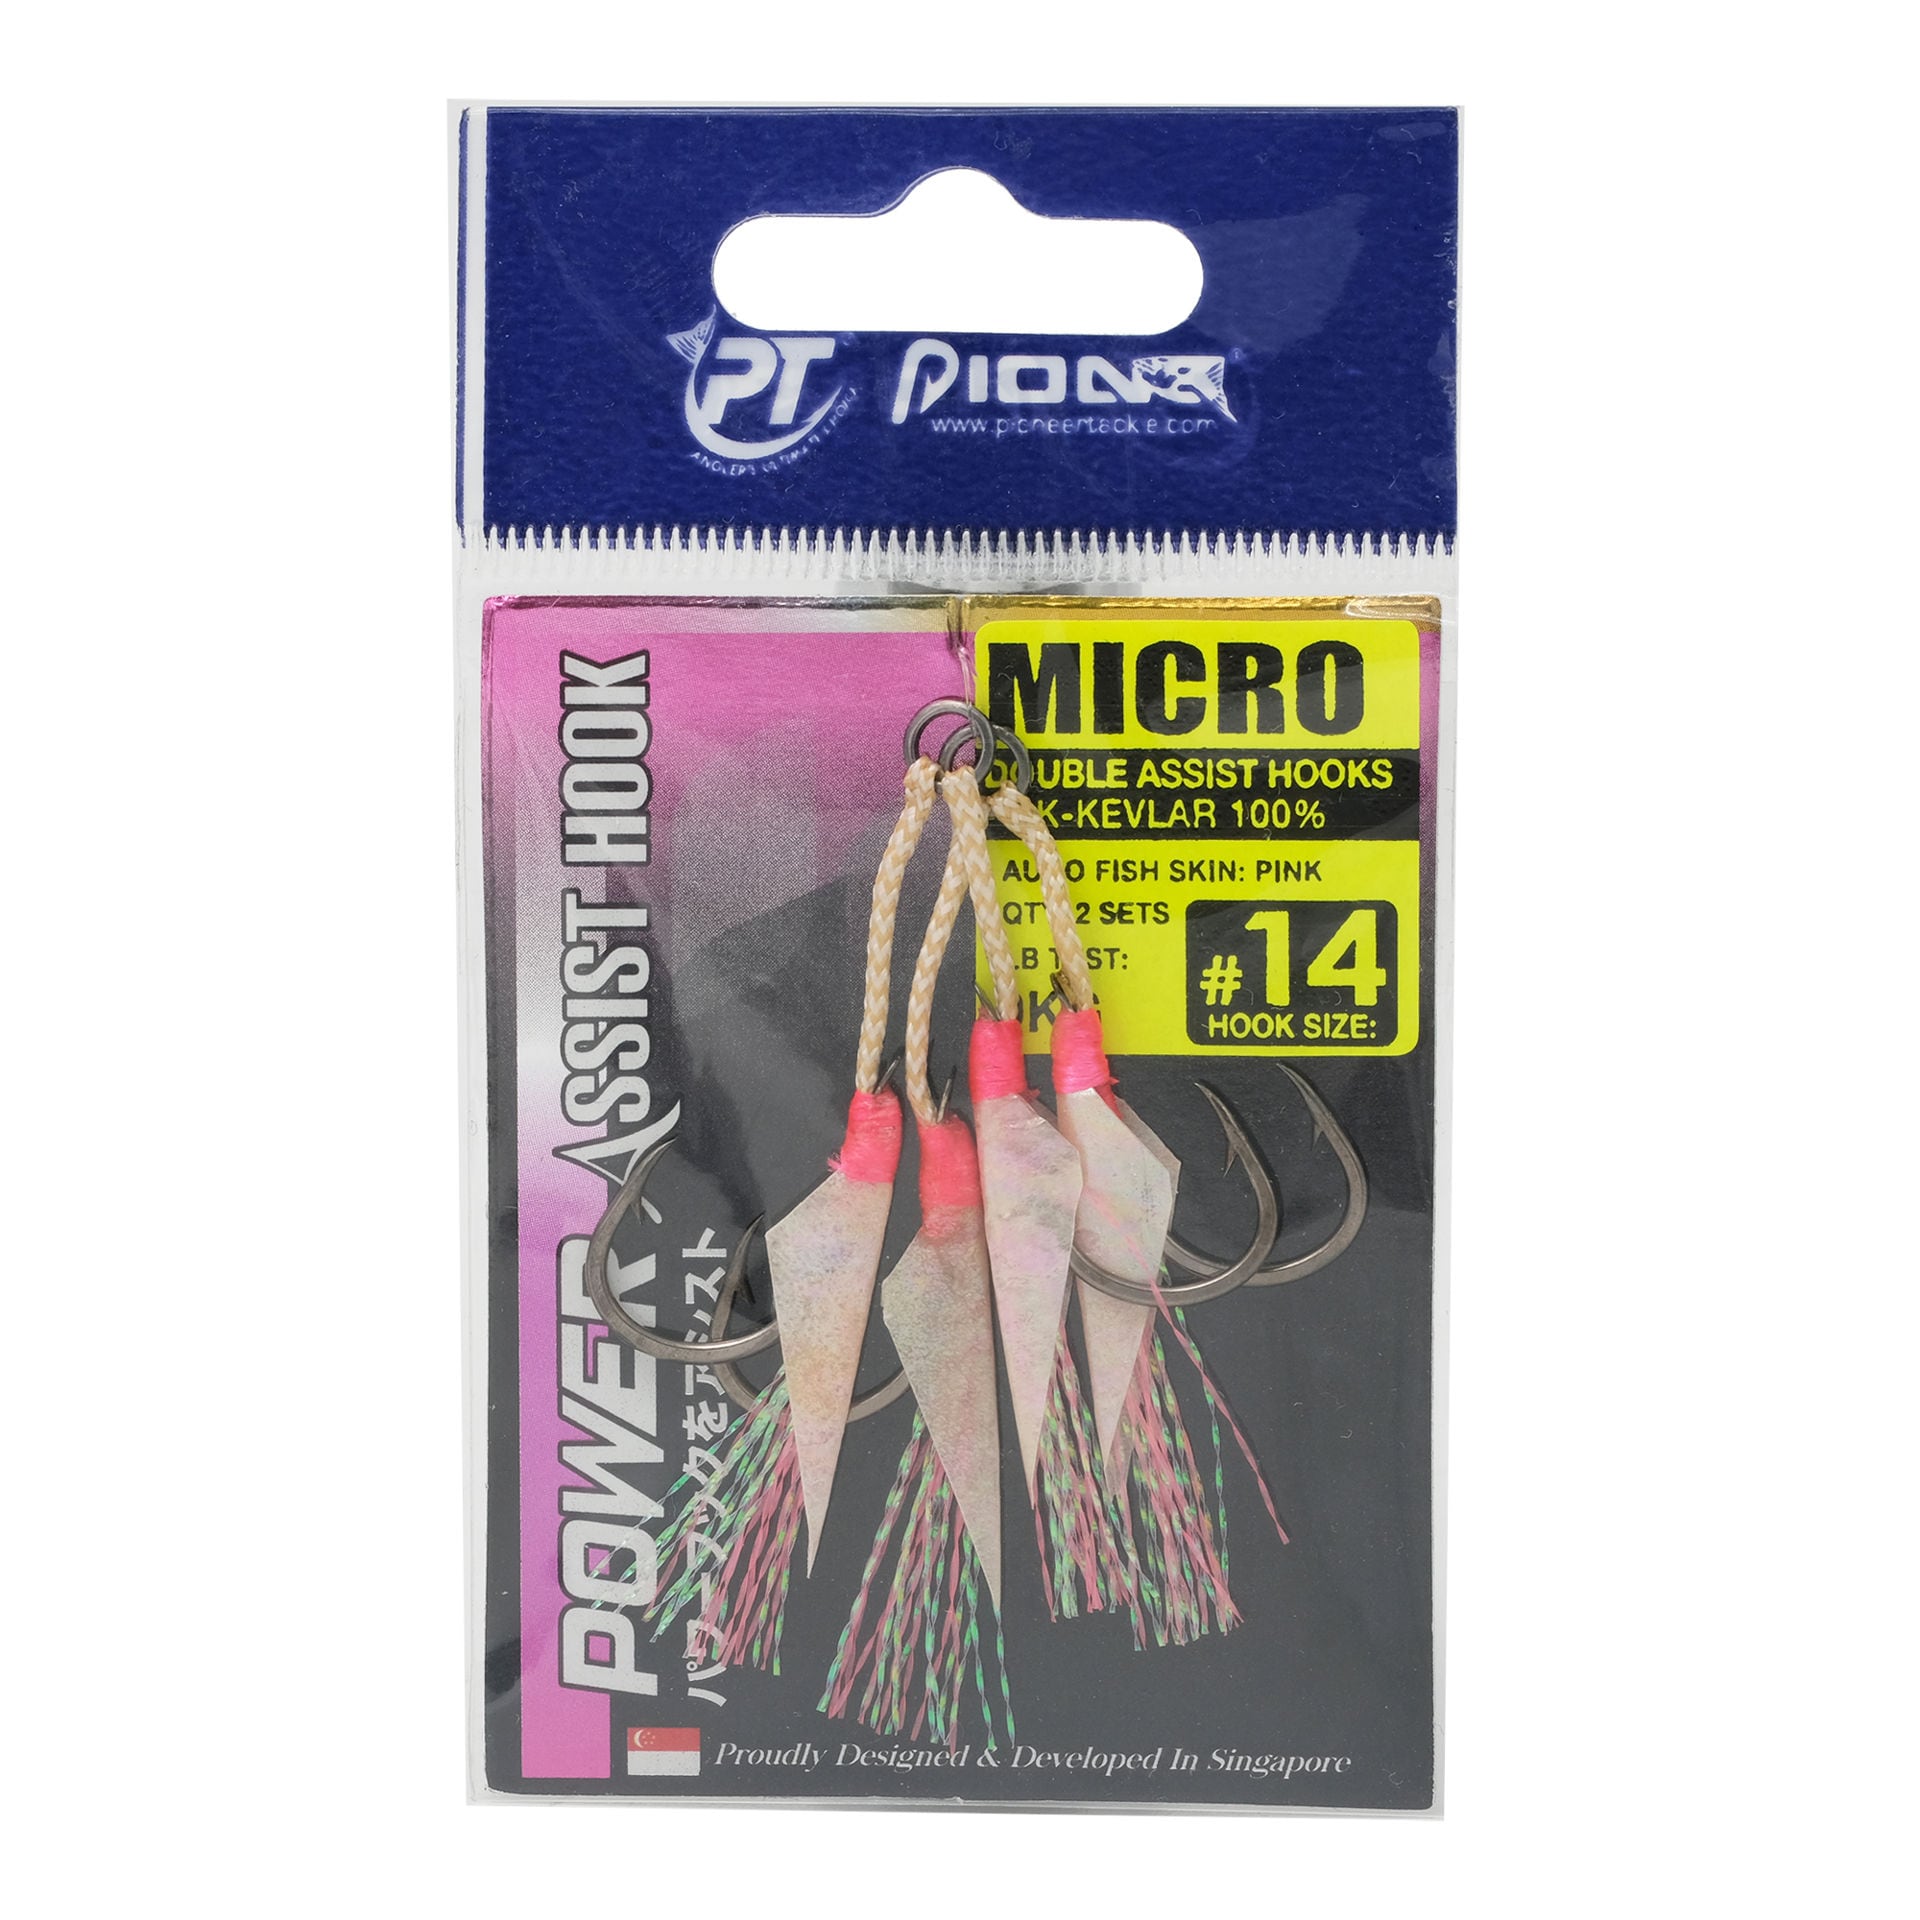 https://assets.dragonmart.ae//pictures/0763100_pioneer-fish-skin-design-micro-double-assist-fishing-hooks-14in-set-of-2.jpeg